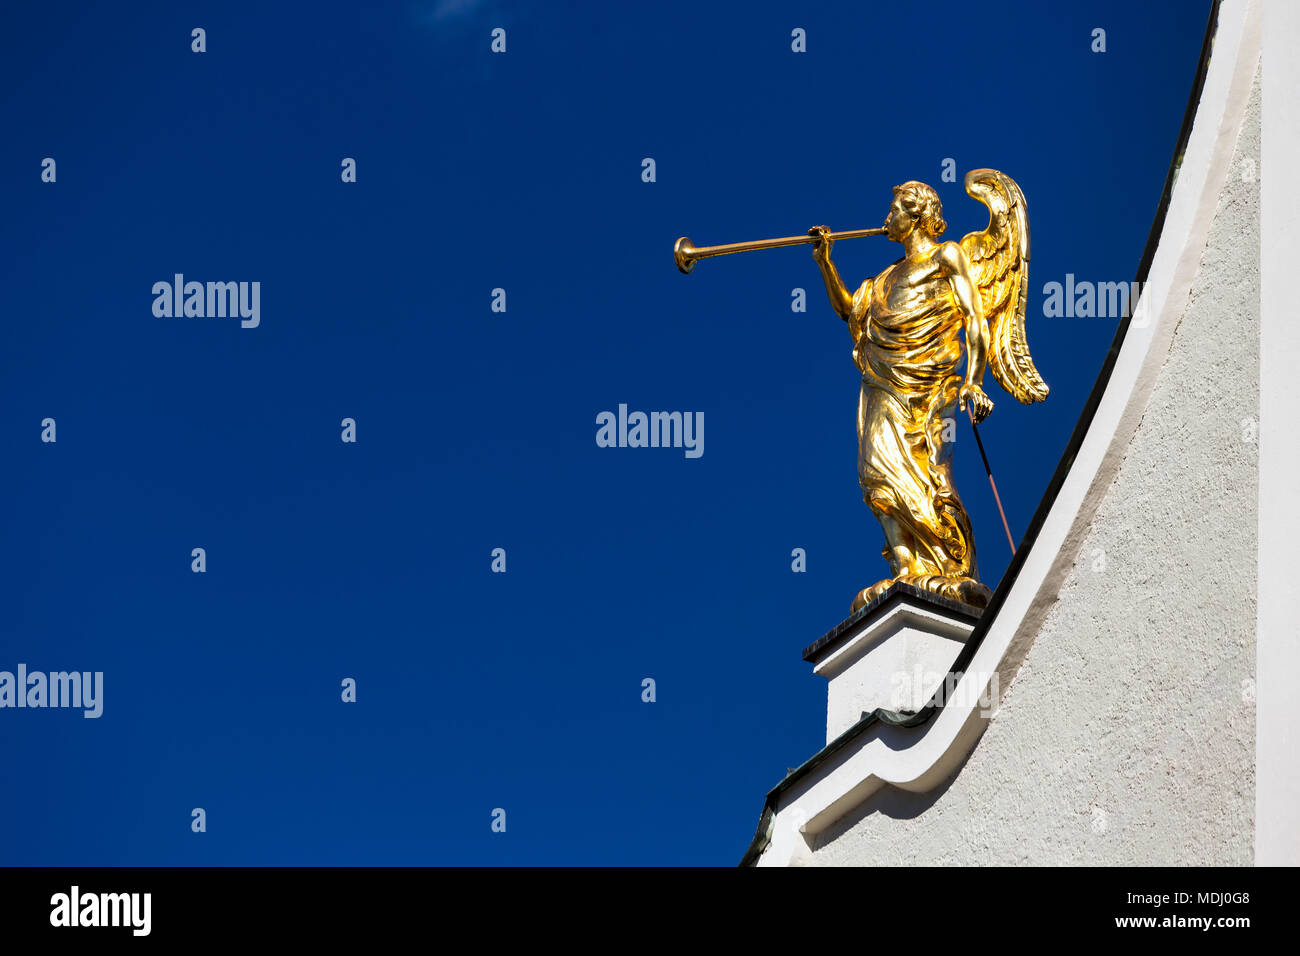 Gold winged angel sculpture with trumpet on top of white church against a blue sky; San Candido, Bolzano, Italy Stock Photo